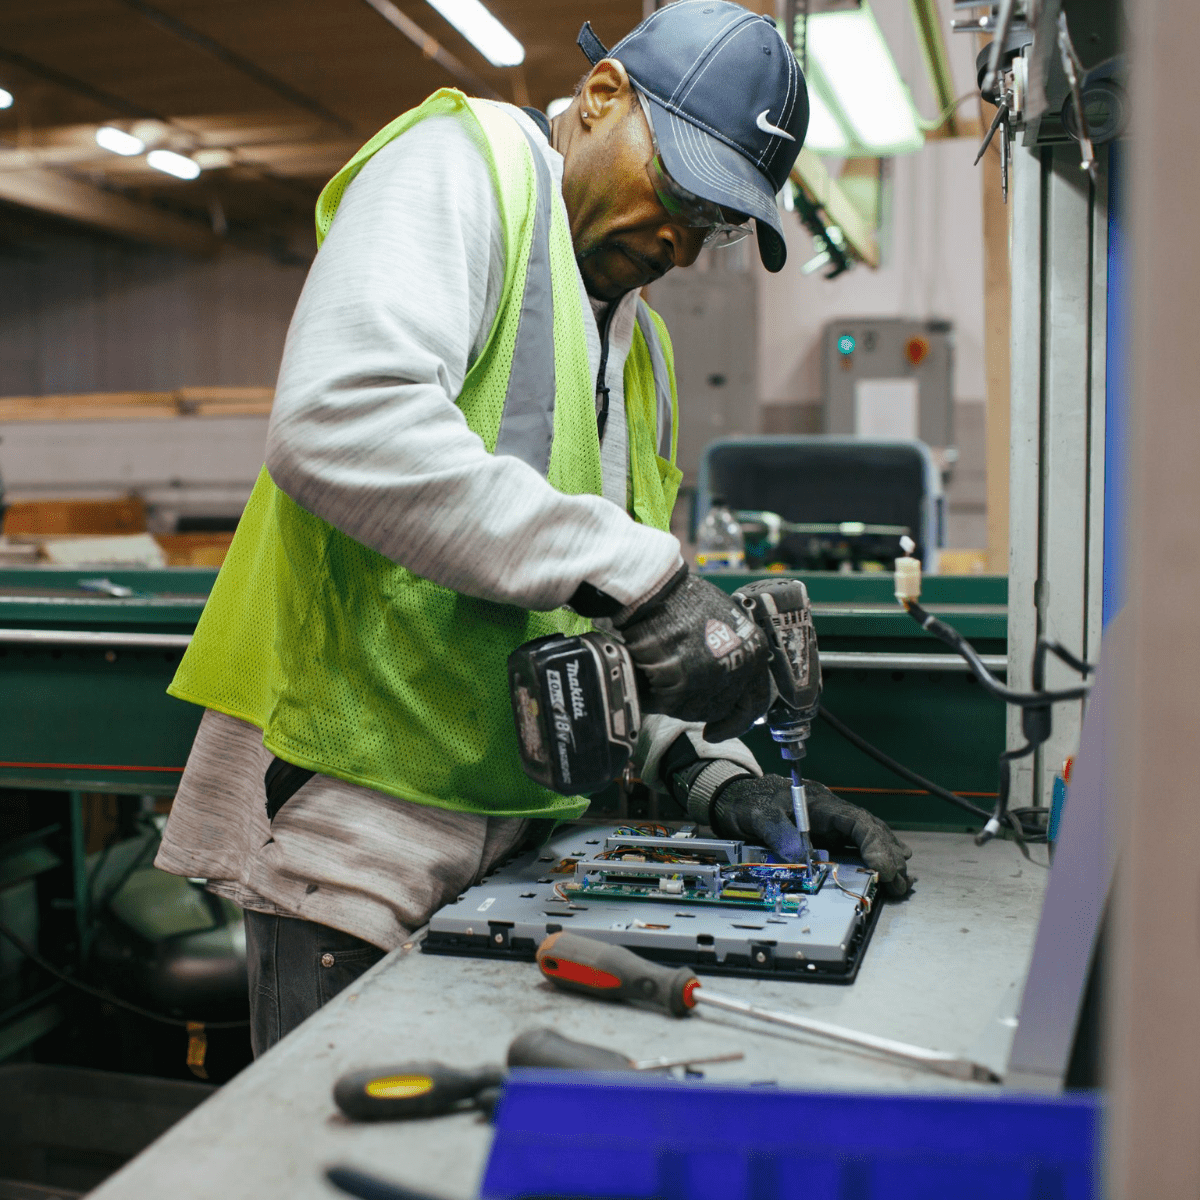 A man wearing a reflective vest using a drill to disassemble a laptop